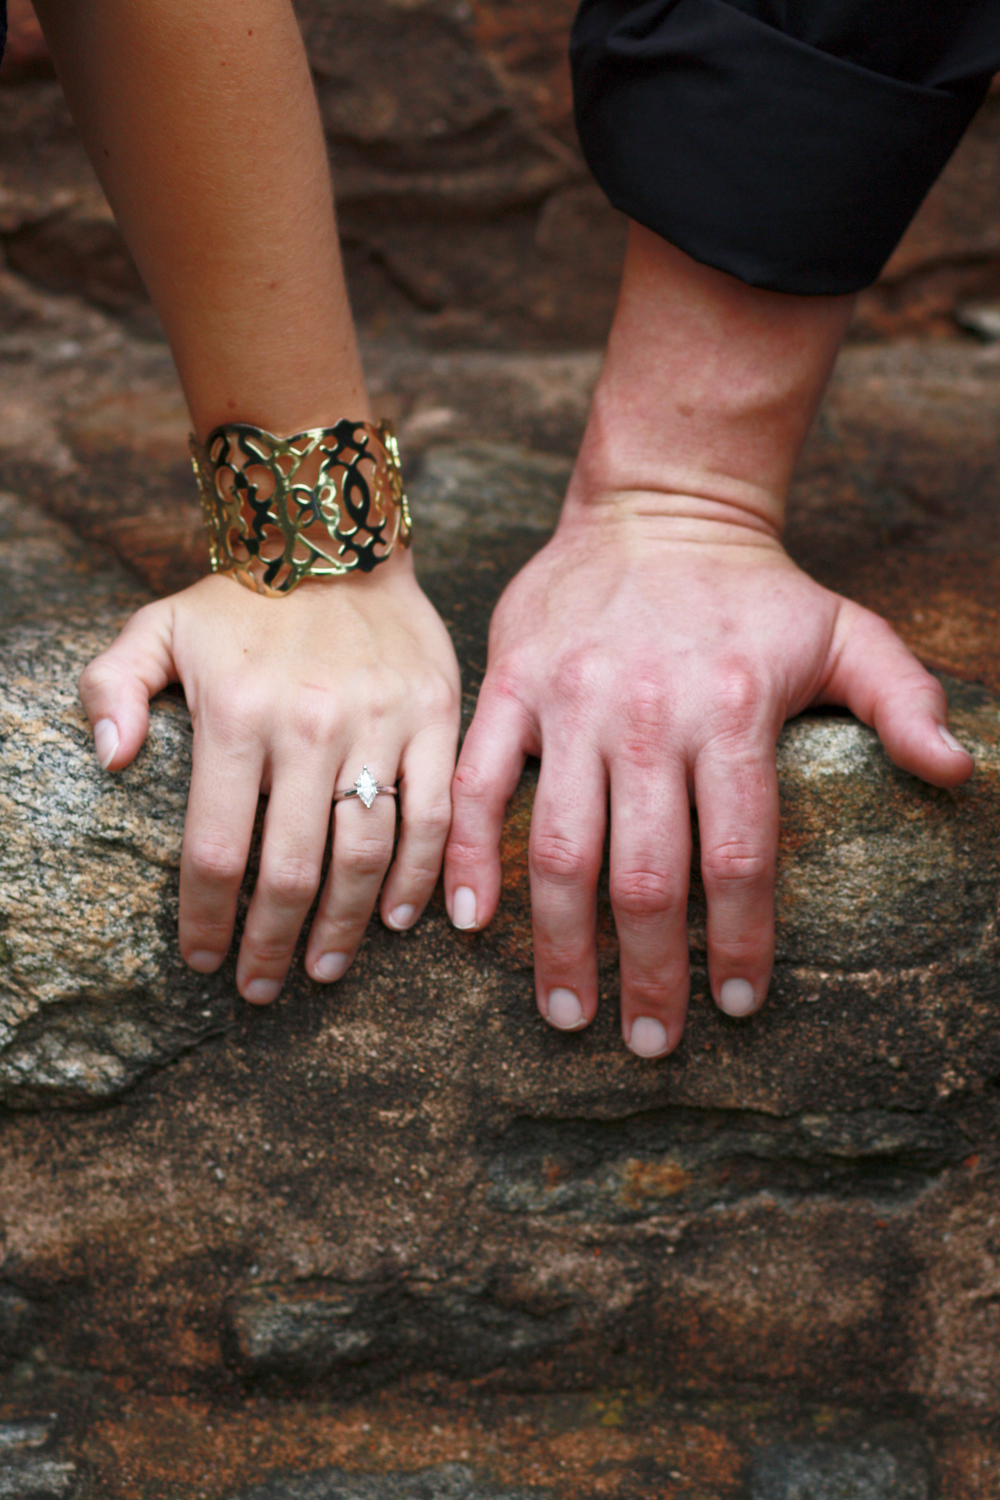 His and Hers Hands with her showing engagement ring